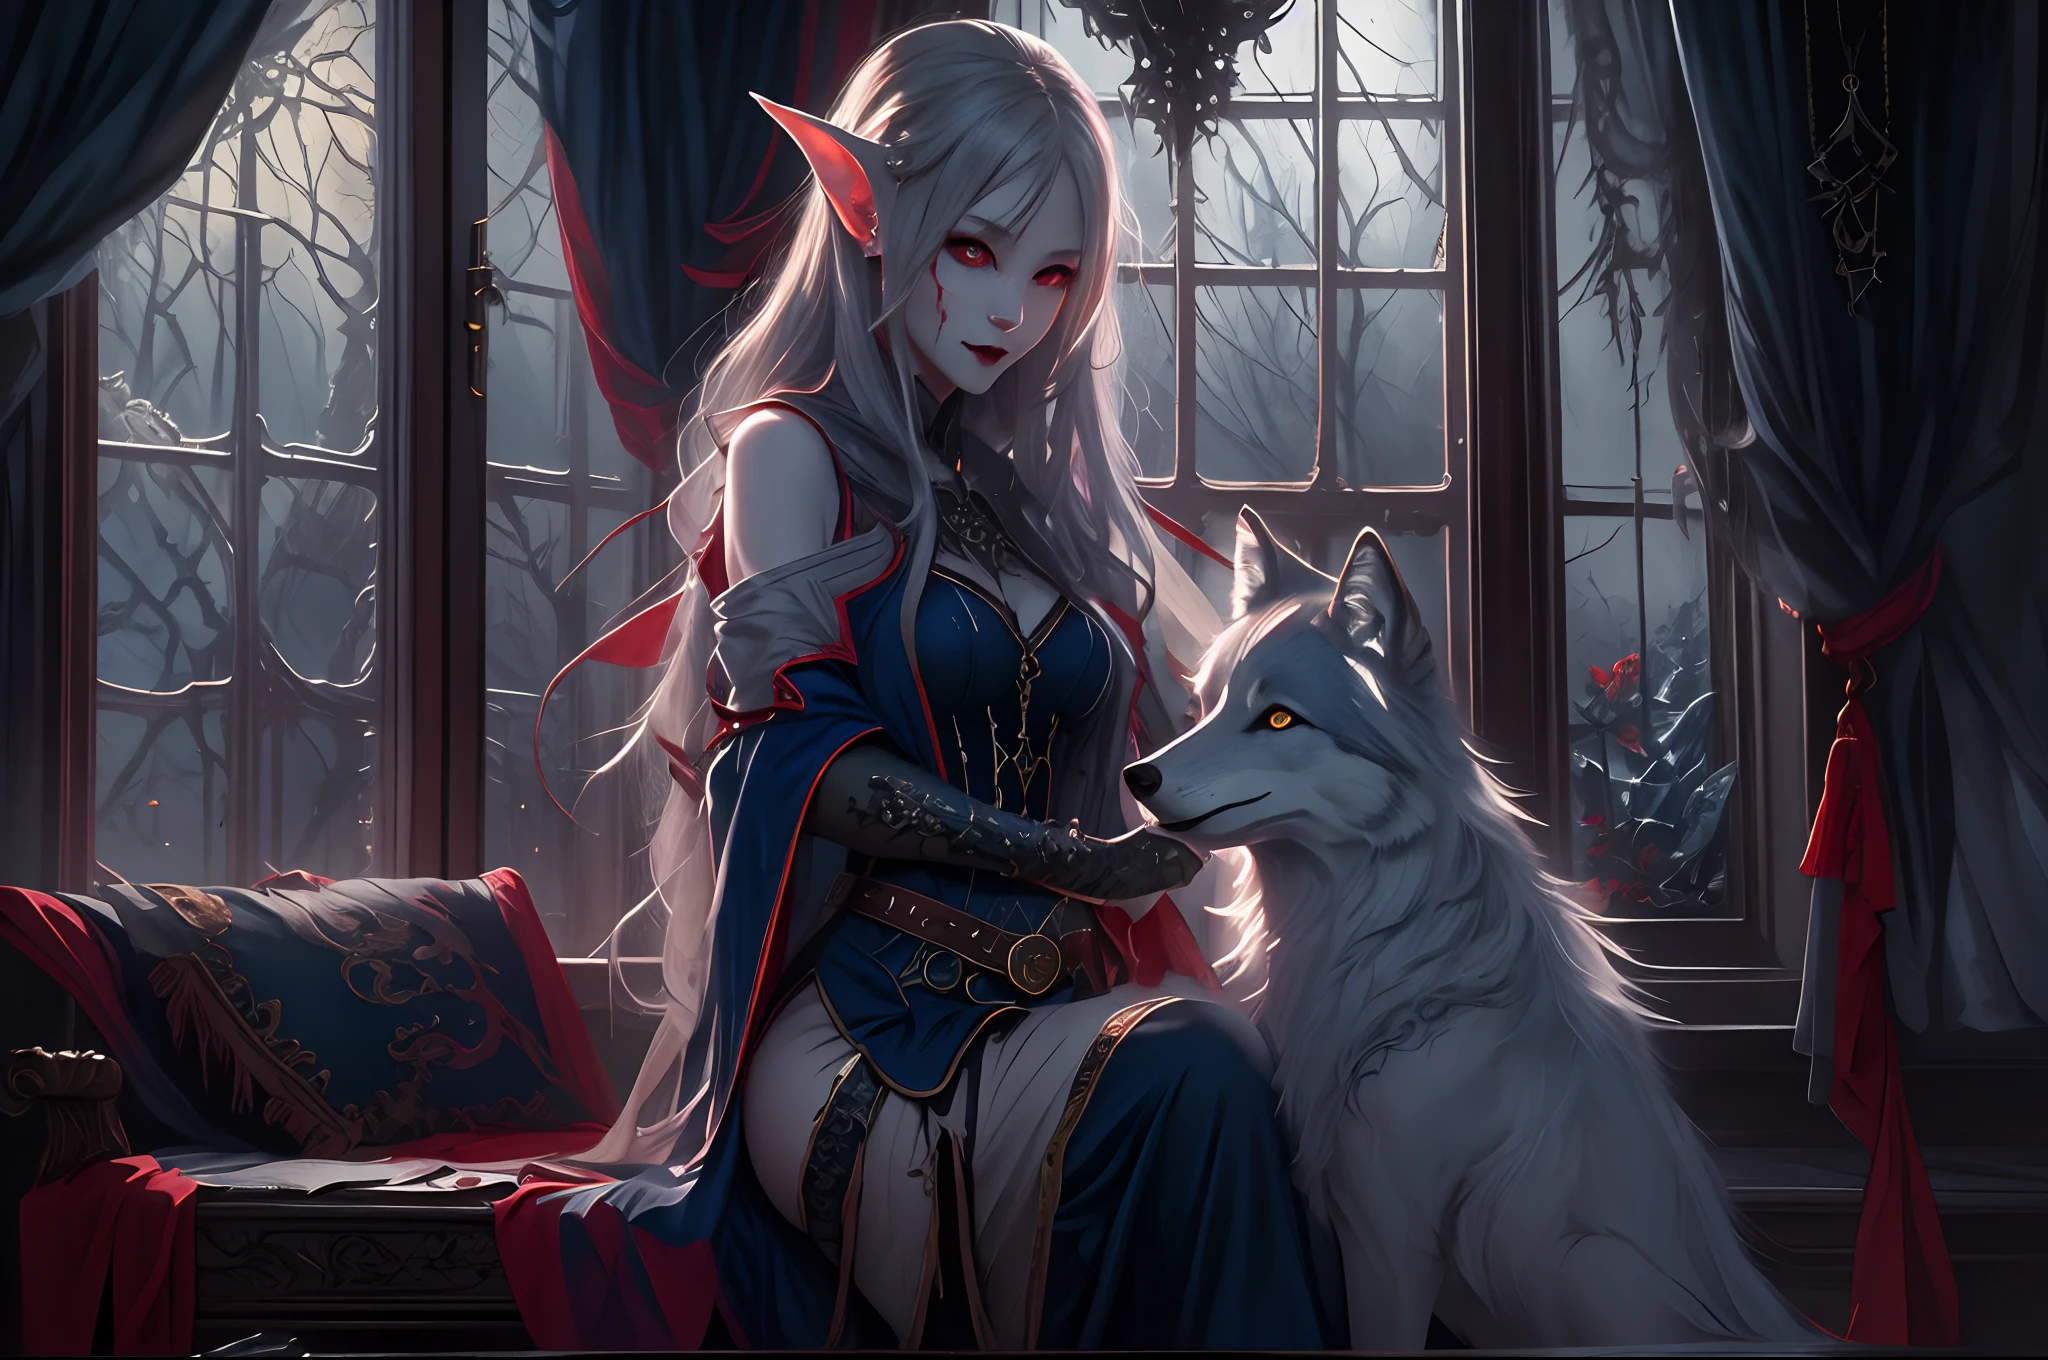 a picture of vampire elf in her castle and her pet wolf, an exquisite beautiful female elf vampire (ultra detailed, Masterpiece, best quality), full body, ultra detailed face (ultra detailed, Masterpiece, best quality), grey skin, blond hair, hair in a ponytail, long hair, blue eyes, cold eyes, glowing eyes, intense, eyes small pointed ears, smirking, smile with drops of blood on face (ultra detailed, Masterpiece, best quality), dark red lips, [vampire fangs], wearing white dress (ultra detailed, Masterpiece, best quality), dark blue cloak, high heeled boots in dark fantasy library, with an big grey wolf (Masterpiece, best quality) book shelves, high details, best quality, 8k, [ultra detailed], masterpiece, best quality, (ultra detailed), full body, ultra wide shot, photorealism, dark fantasy art, gothic art, moon light coming through the window, moon rays, gothic art, sense of dread, sense of seduction